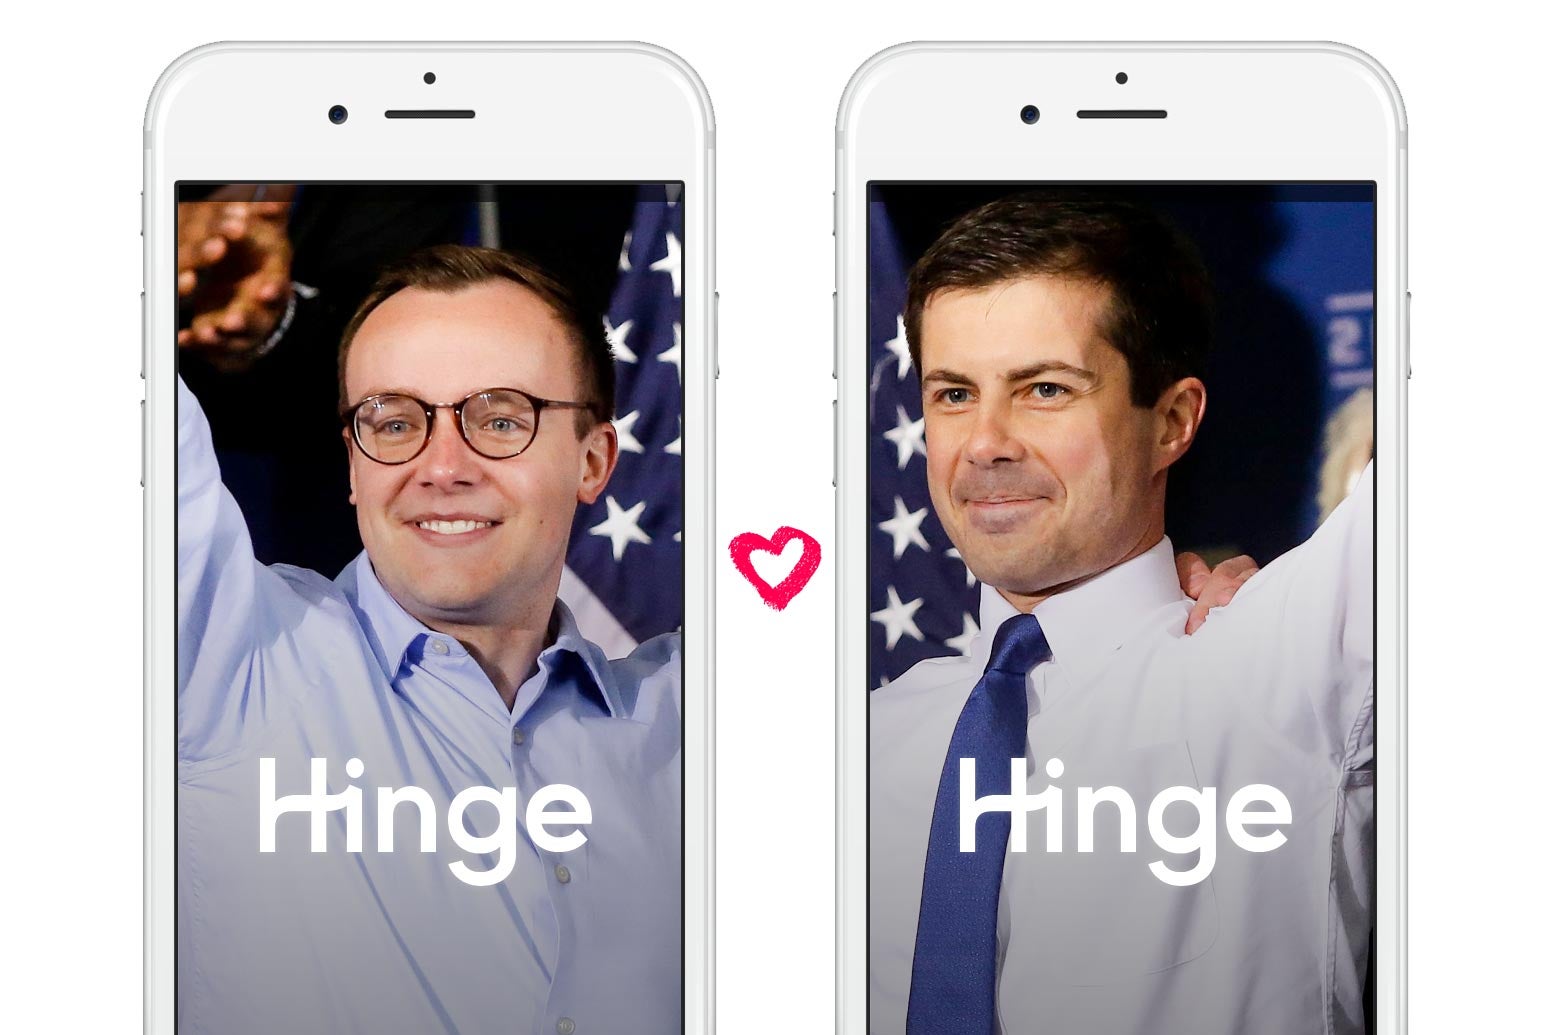 Chasten and Pete Buttigieg, shown on iPhones displaying the Hinge app.